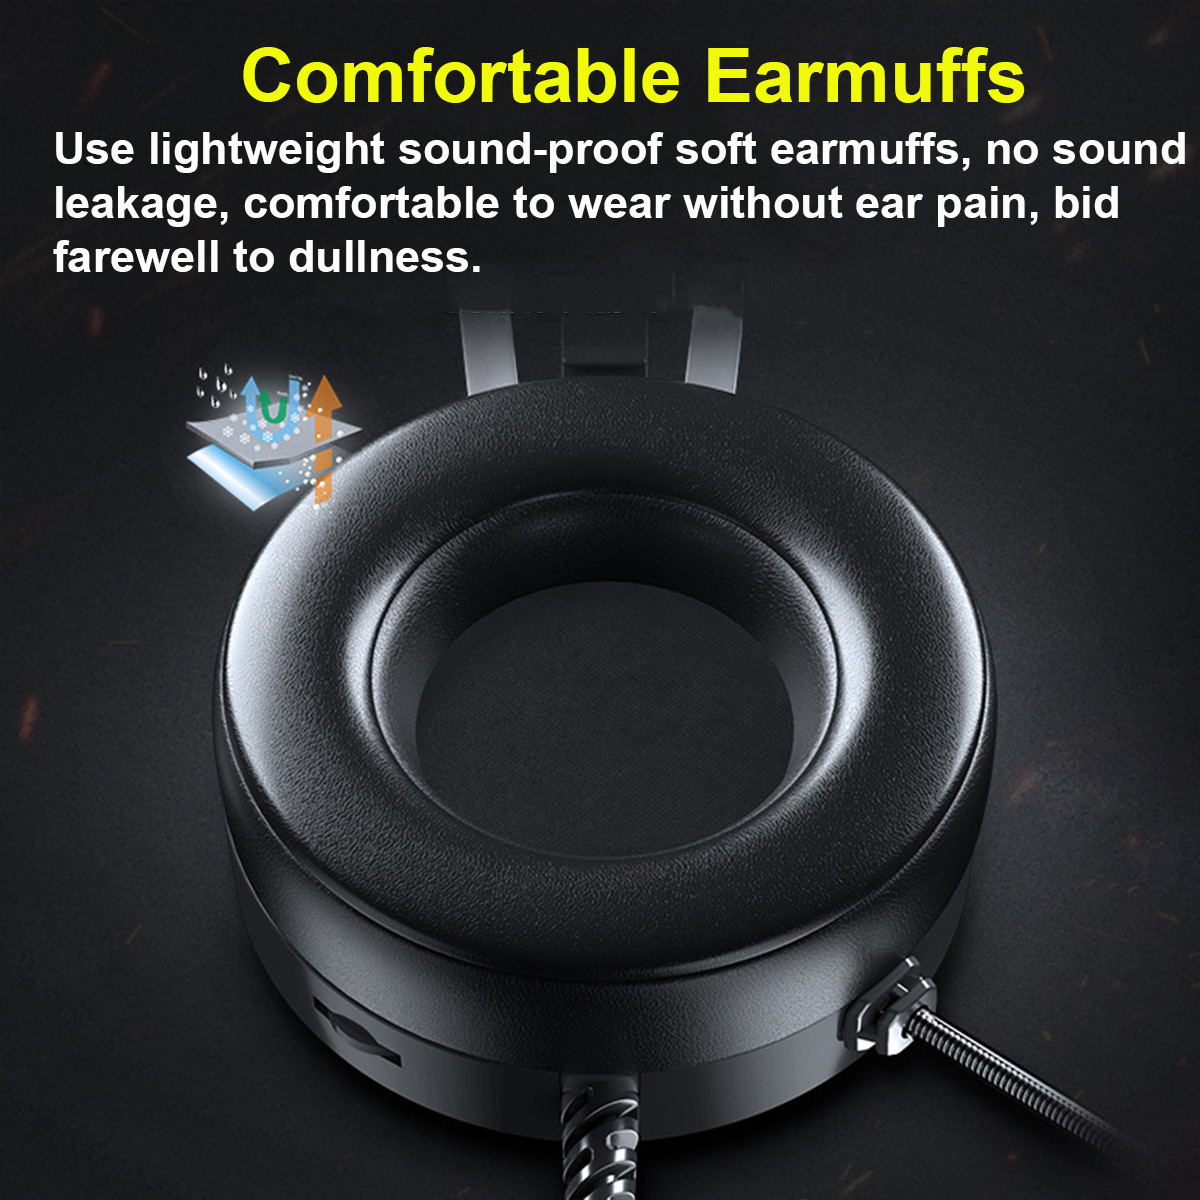 Bakeey-Gaming-Headphone-USB-Port-50mm-Driver-Headset-Foldable-Over-Ear-Gaming-Headset-Noise-Cancelli-1747835-4